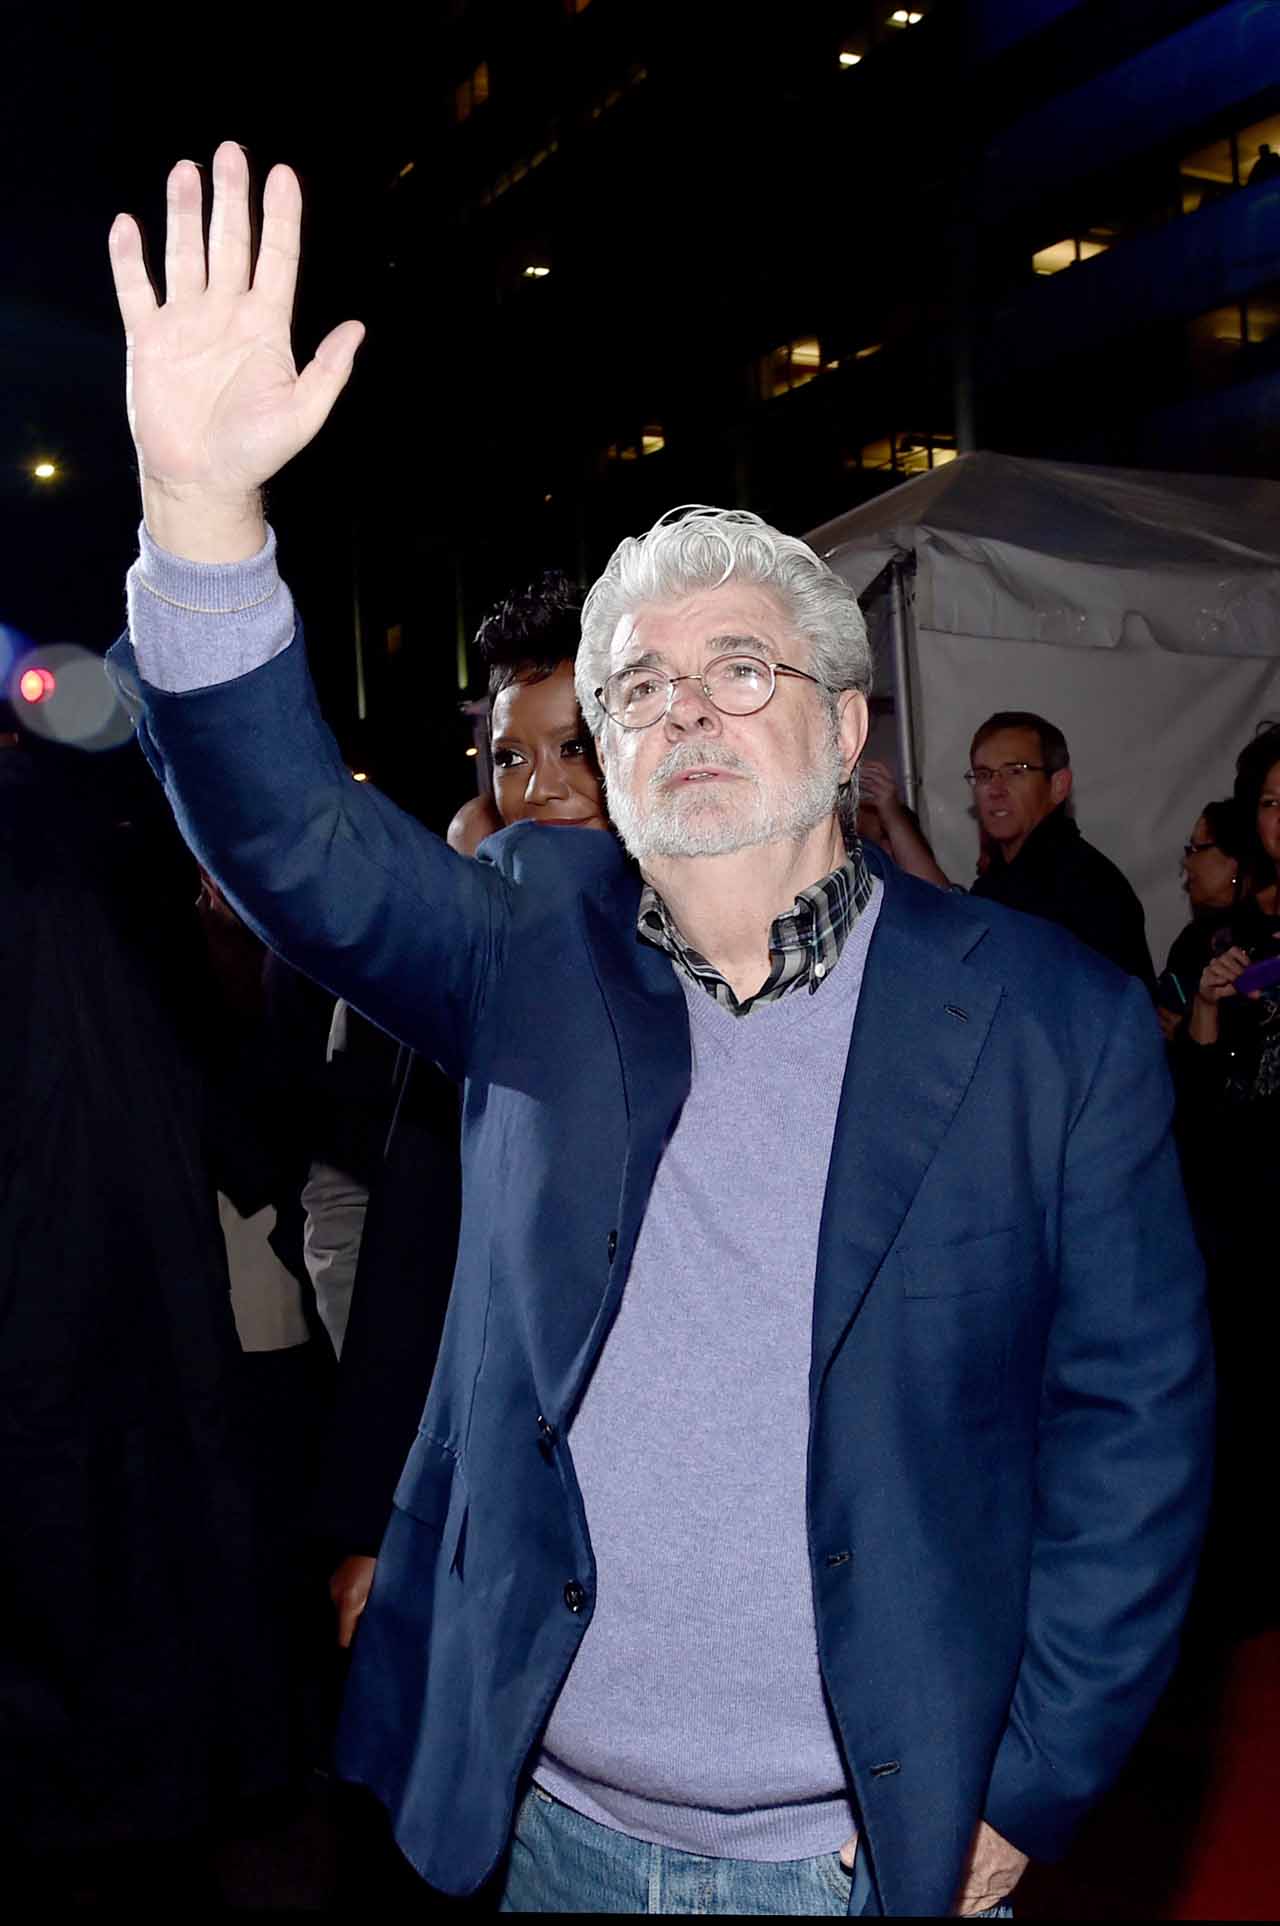 HOLLYWOOD, CA - DECEMBER 14:  Director George Lucas attends the World Premiere of ?Star Wars: The Force Awakens? at the Dolby, El Capitan, and TCL Theatres on December 14, 2015 in Hollywood, California.  (Photo by Alberto E. Rodriguez/Getty Images for Disney) *** Local Caption *** George Lucas